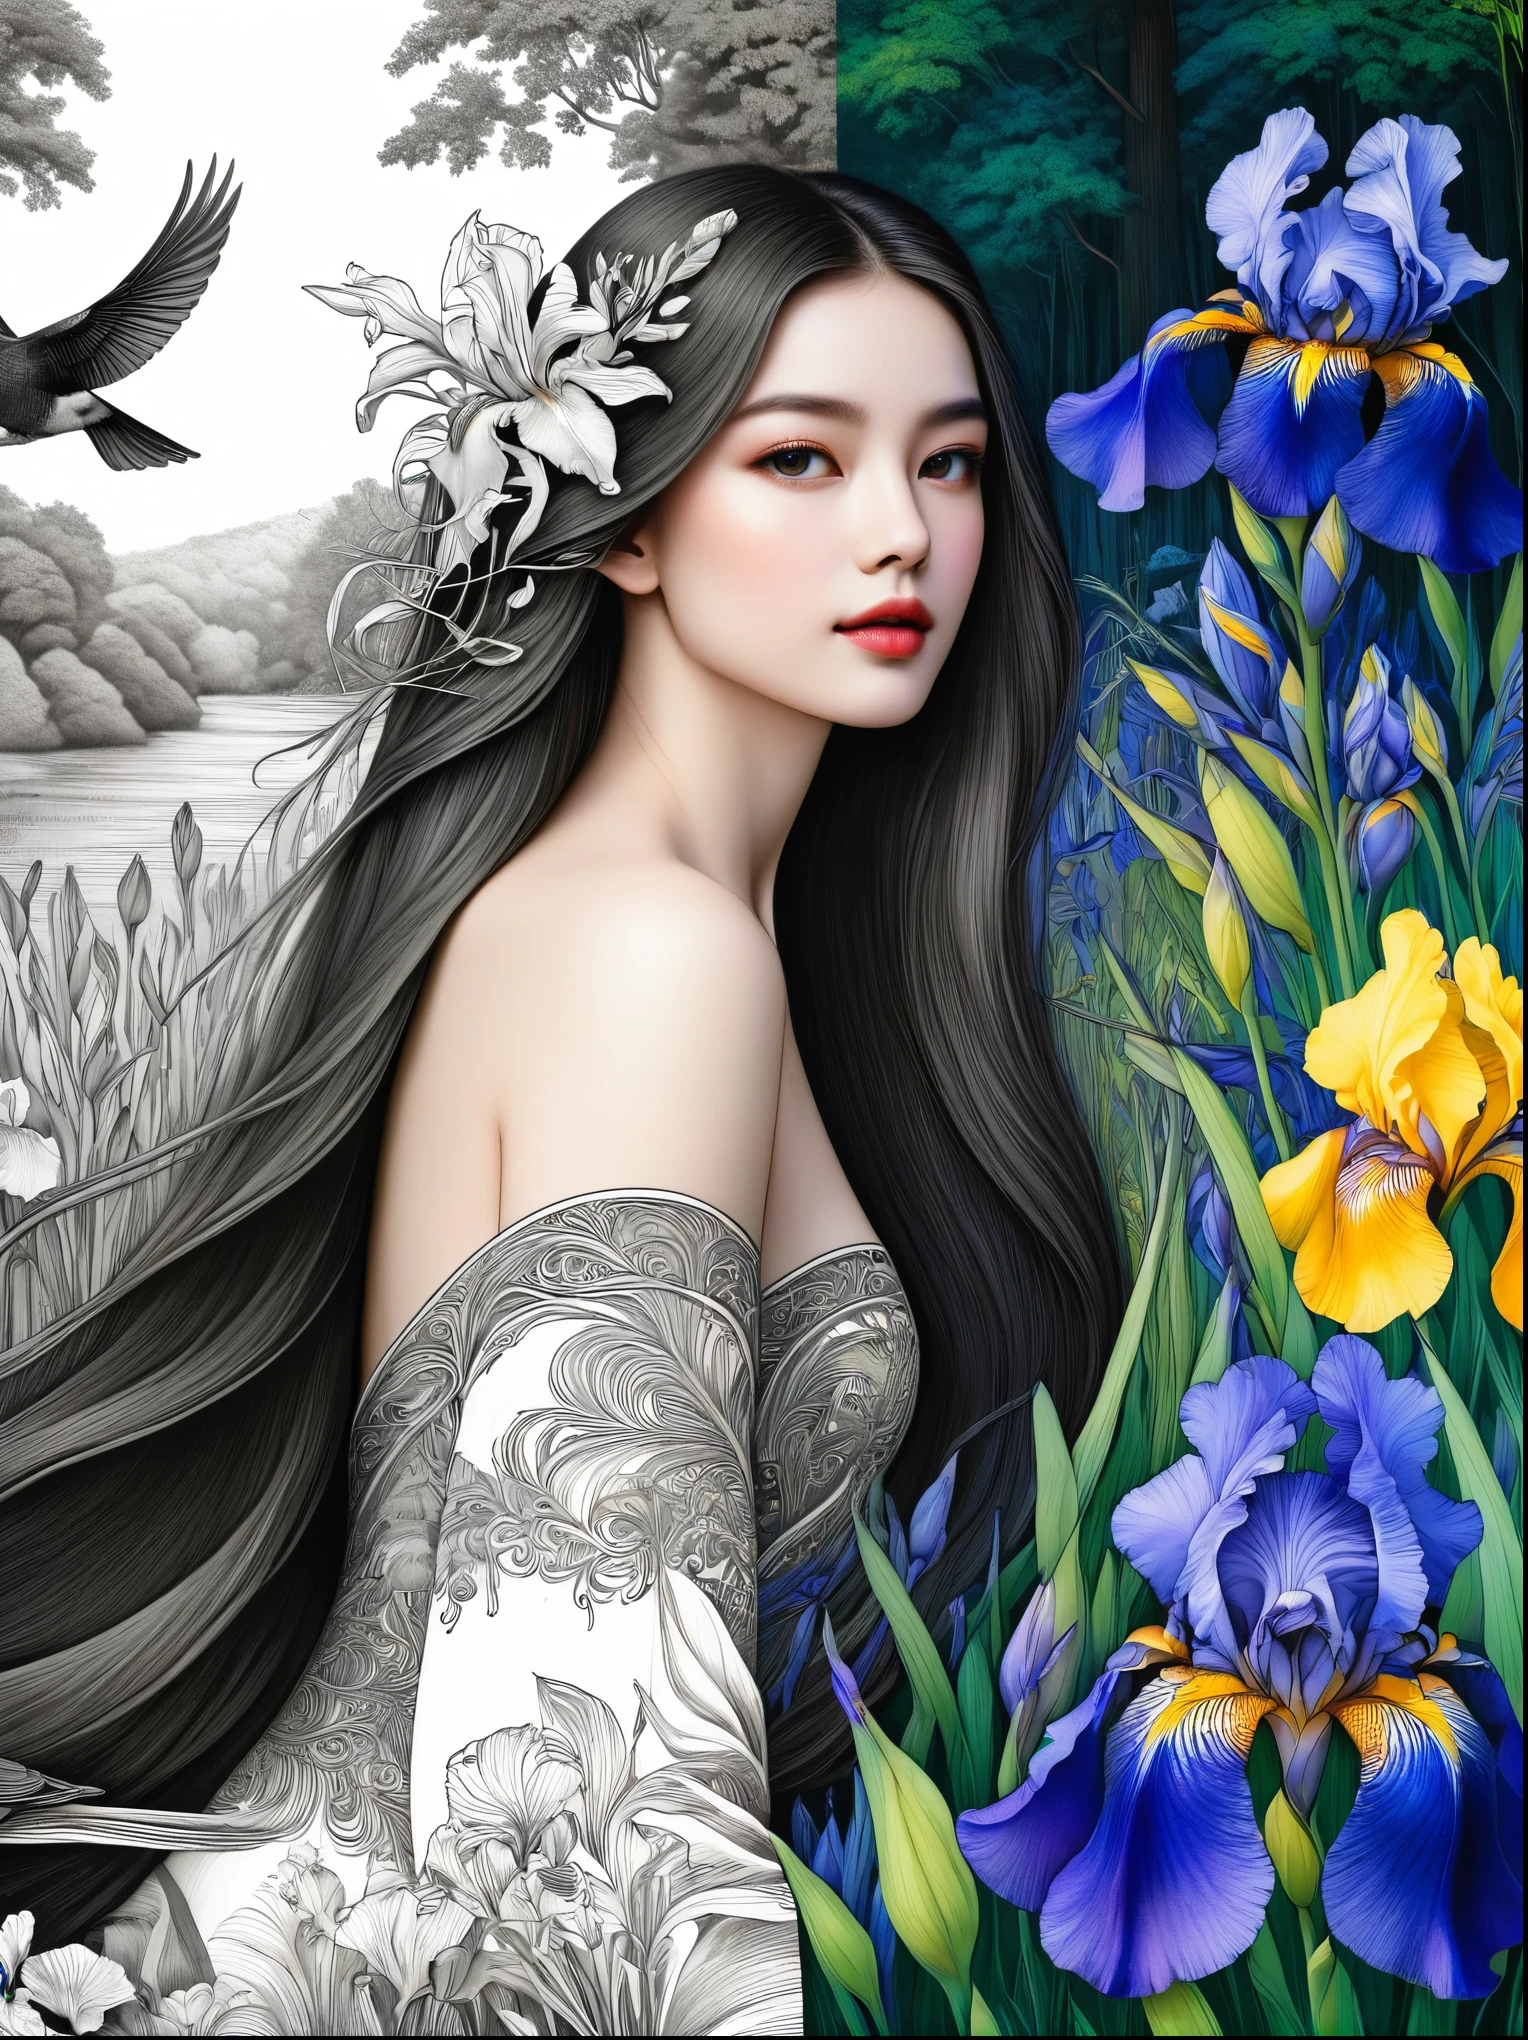 Bird，Wildflowers and irises in a forest setting，1 image of a long-haired beauty，Artwork should be in pencil drawing style，Transition from black and white on the left half to bright colors on the right half，Ensure seamless integration between the two halves，No dividing line，The scene is the same on both sides，Black and white pencil detail on left side，Right side filled with color，The blend formed in the whole image，Perfect details, animation art style, Large murals, Sharp contrast between light and dark